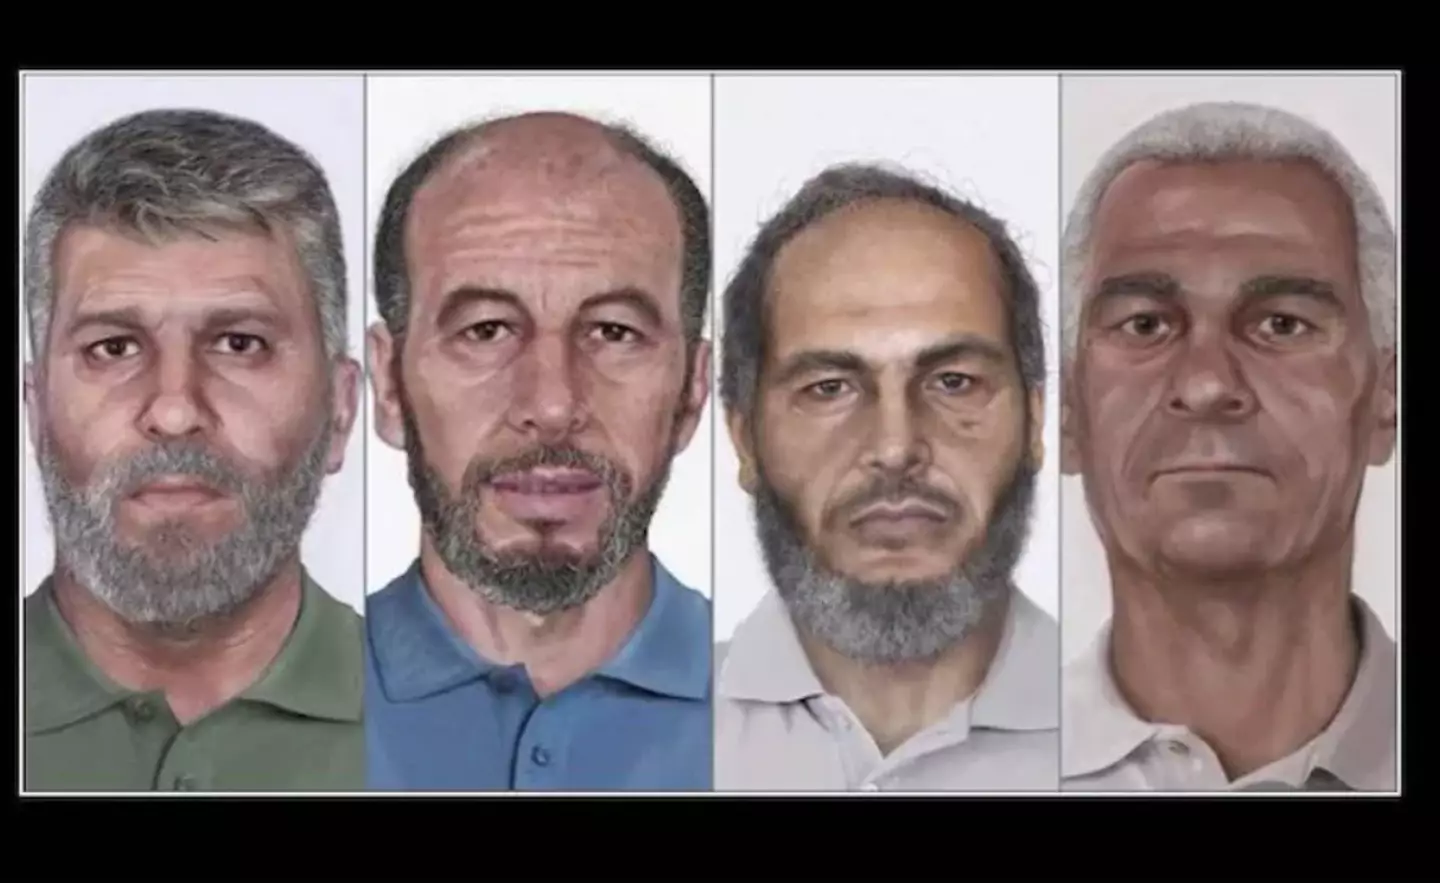 The hijackers, pictured, acted for the terrorist organisation Abu Nidal.